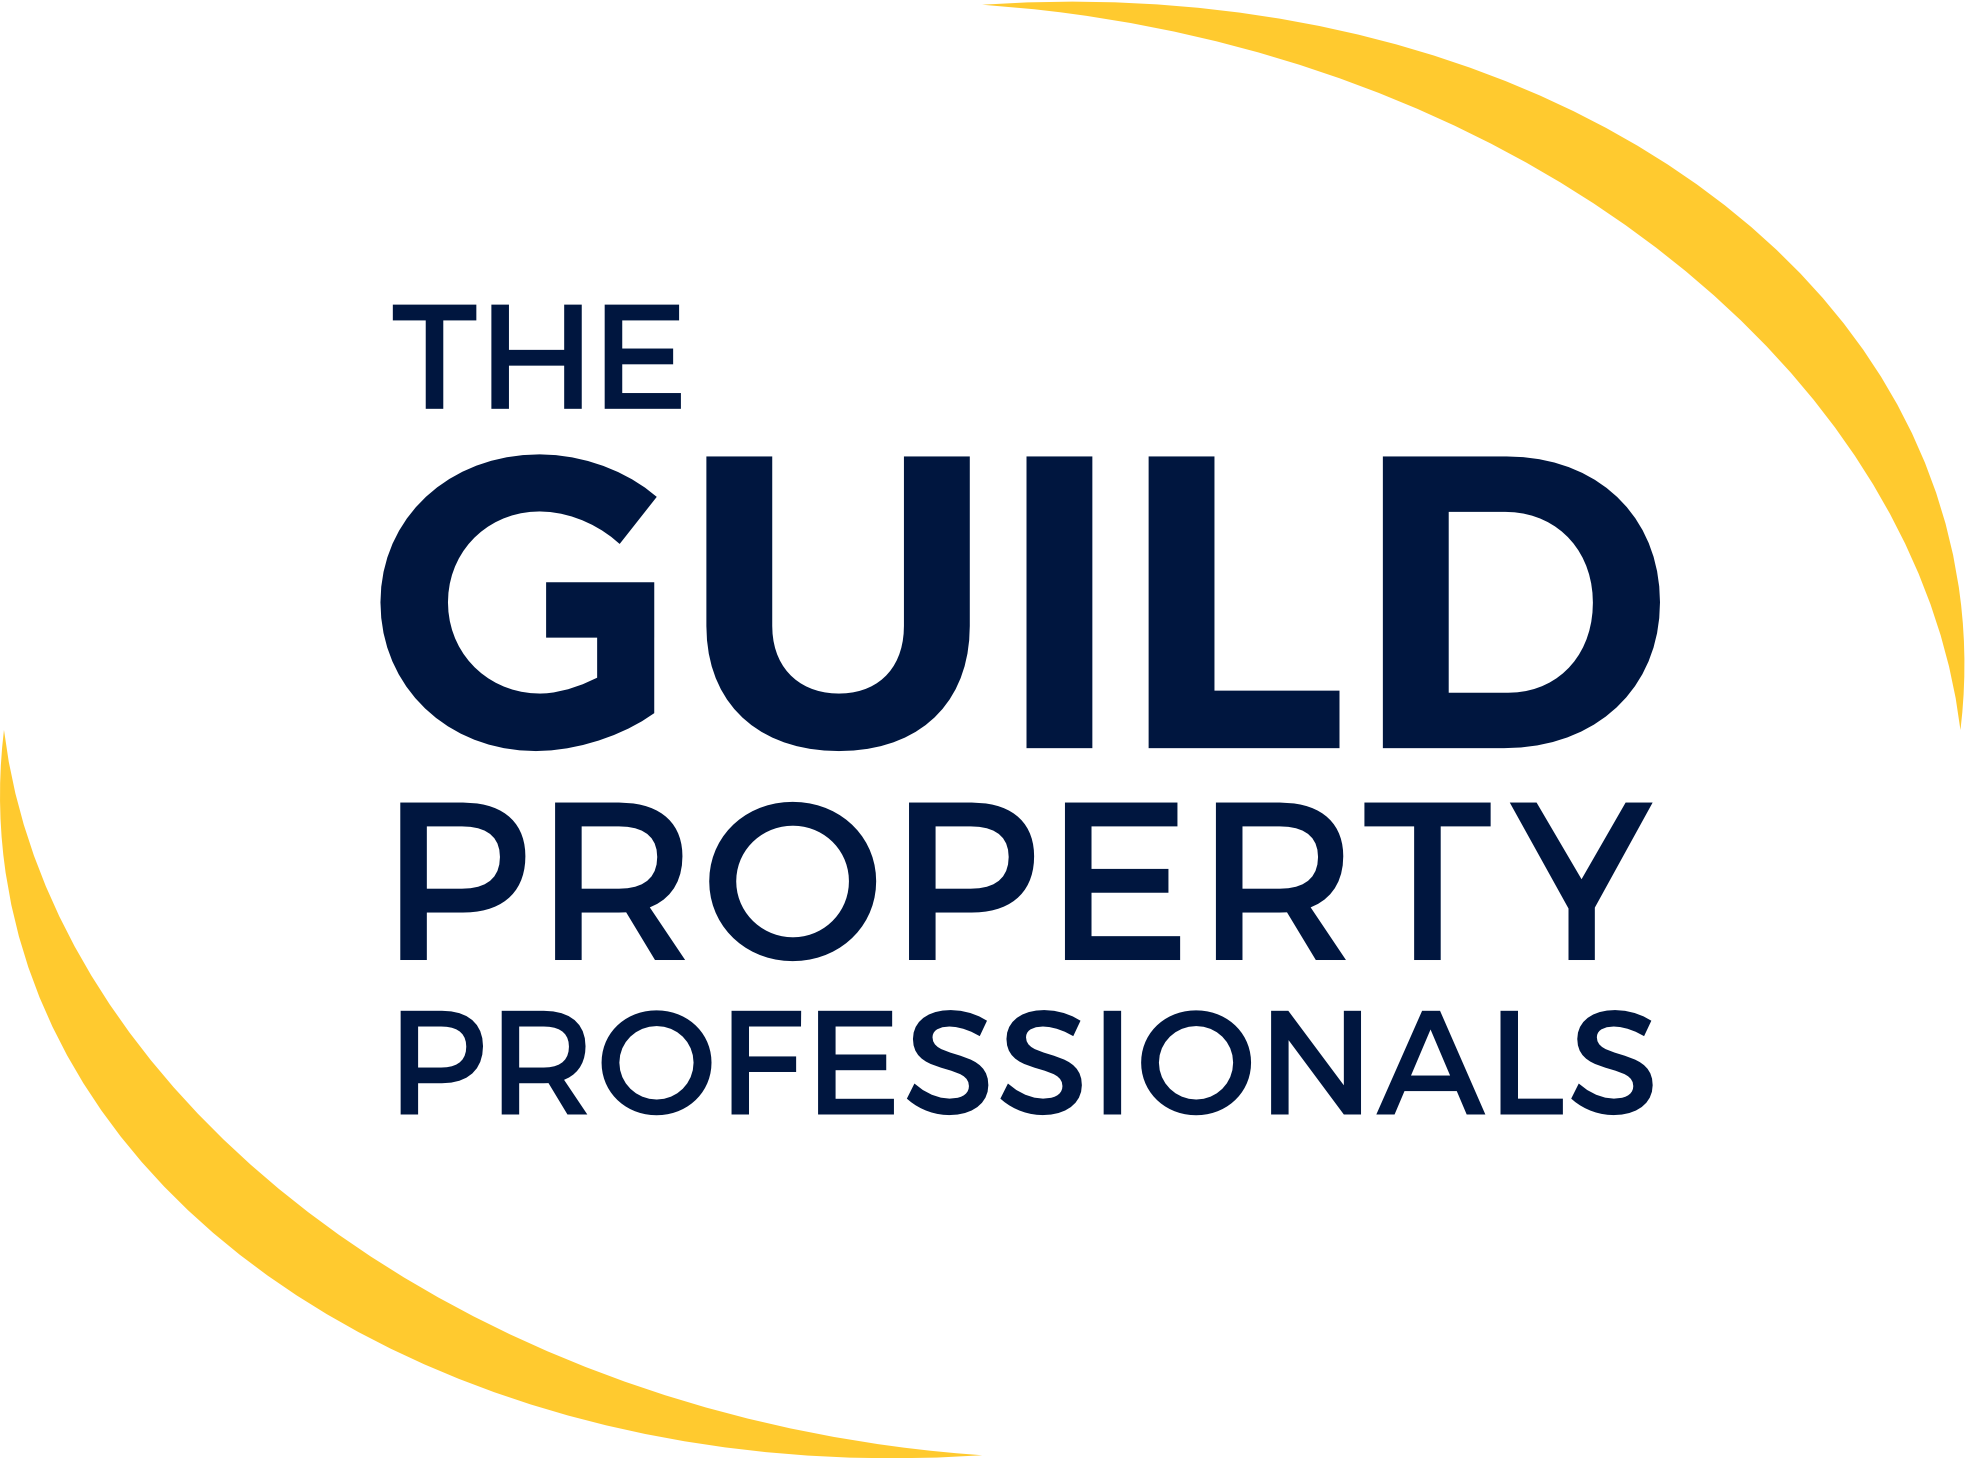 The-Guild-Property-Professionals